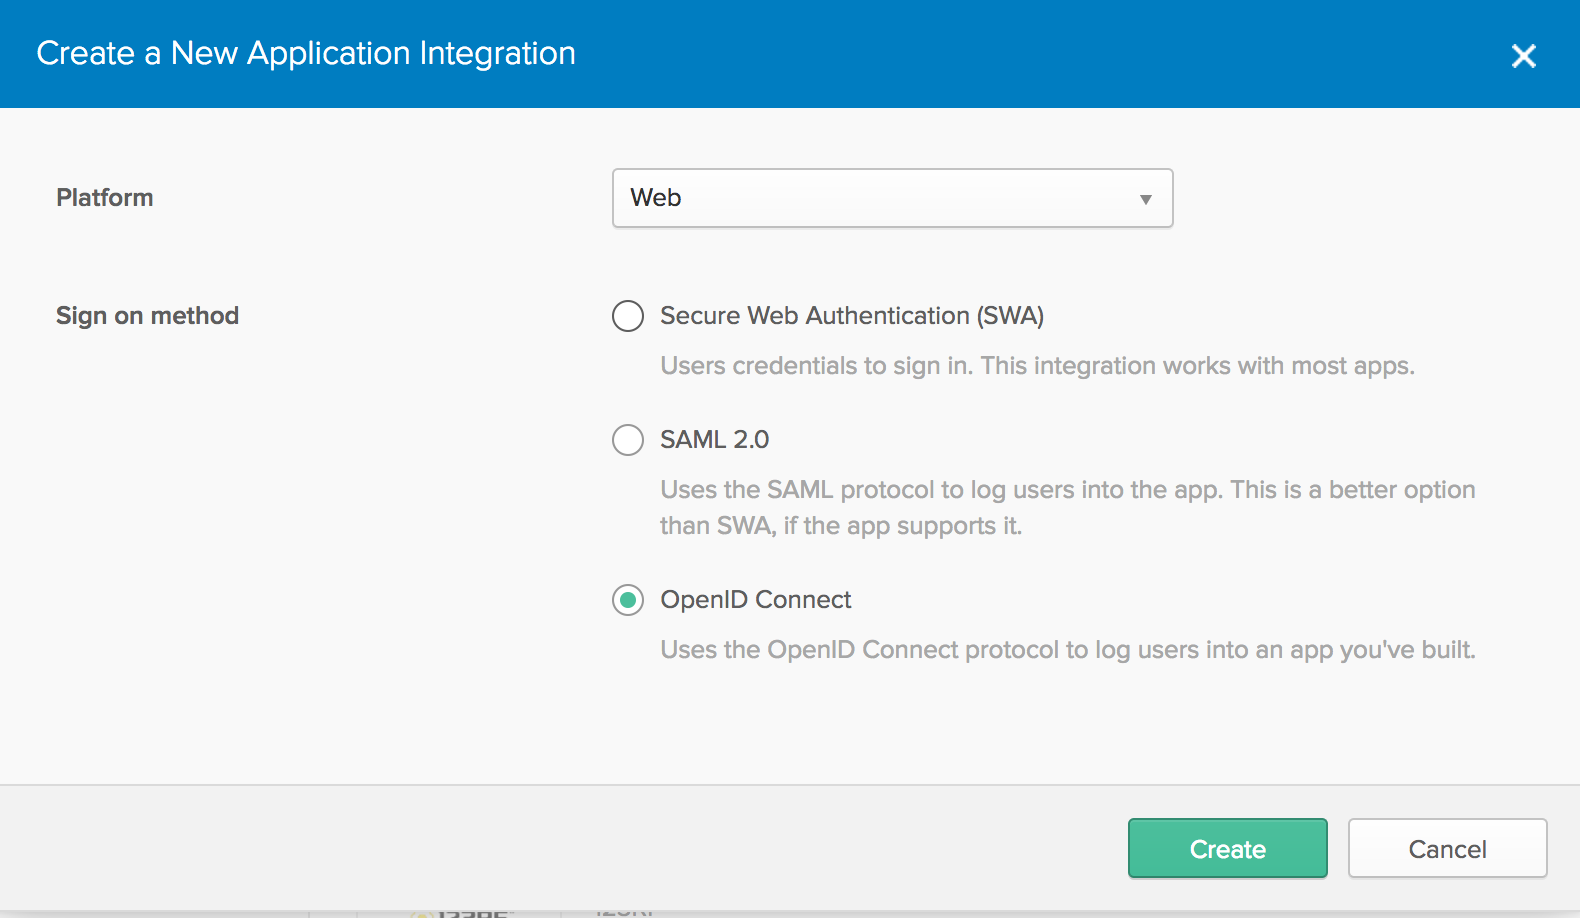 Create Application Page